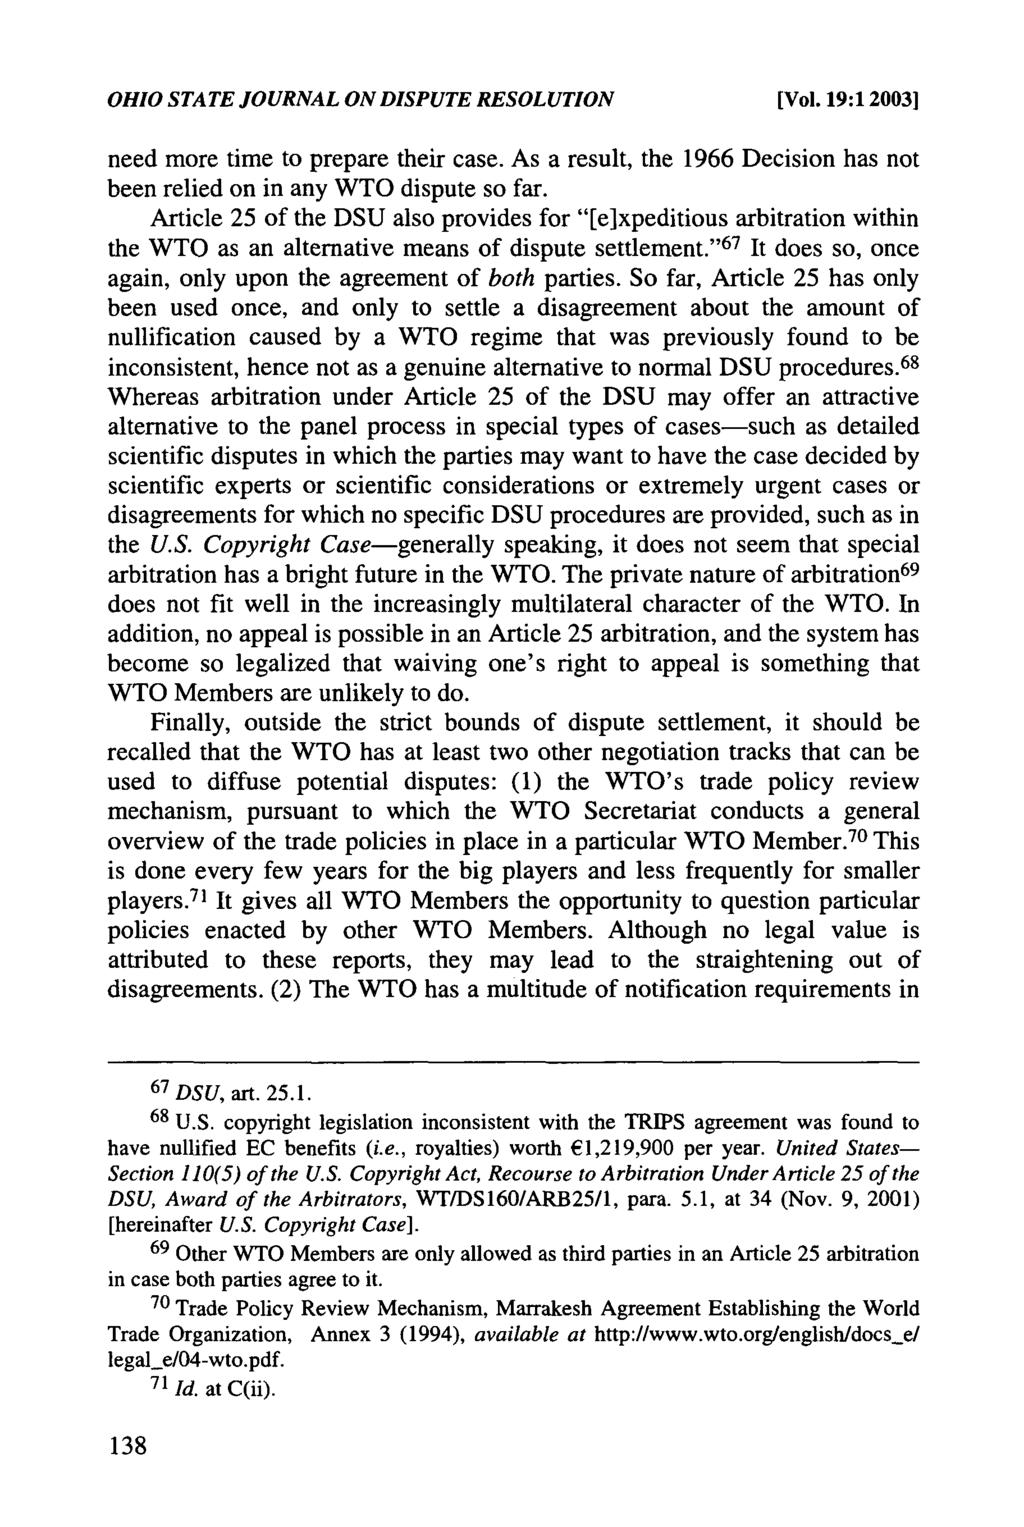 OHIO STATE JOURNAL ON DISPUTE RESOLUTION [Vol. 19:1 20031 need more time to prepare their case. As a result, the 1966 Decision has not been relied on in any WTO dispute so far.